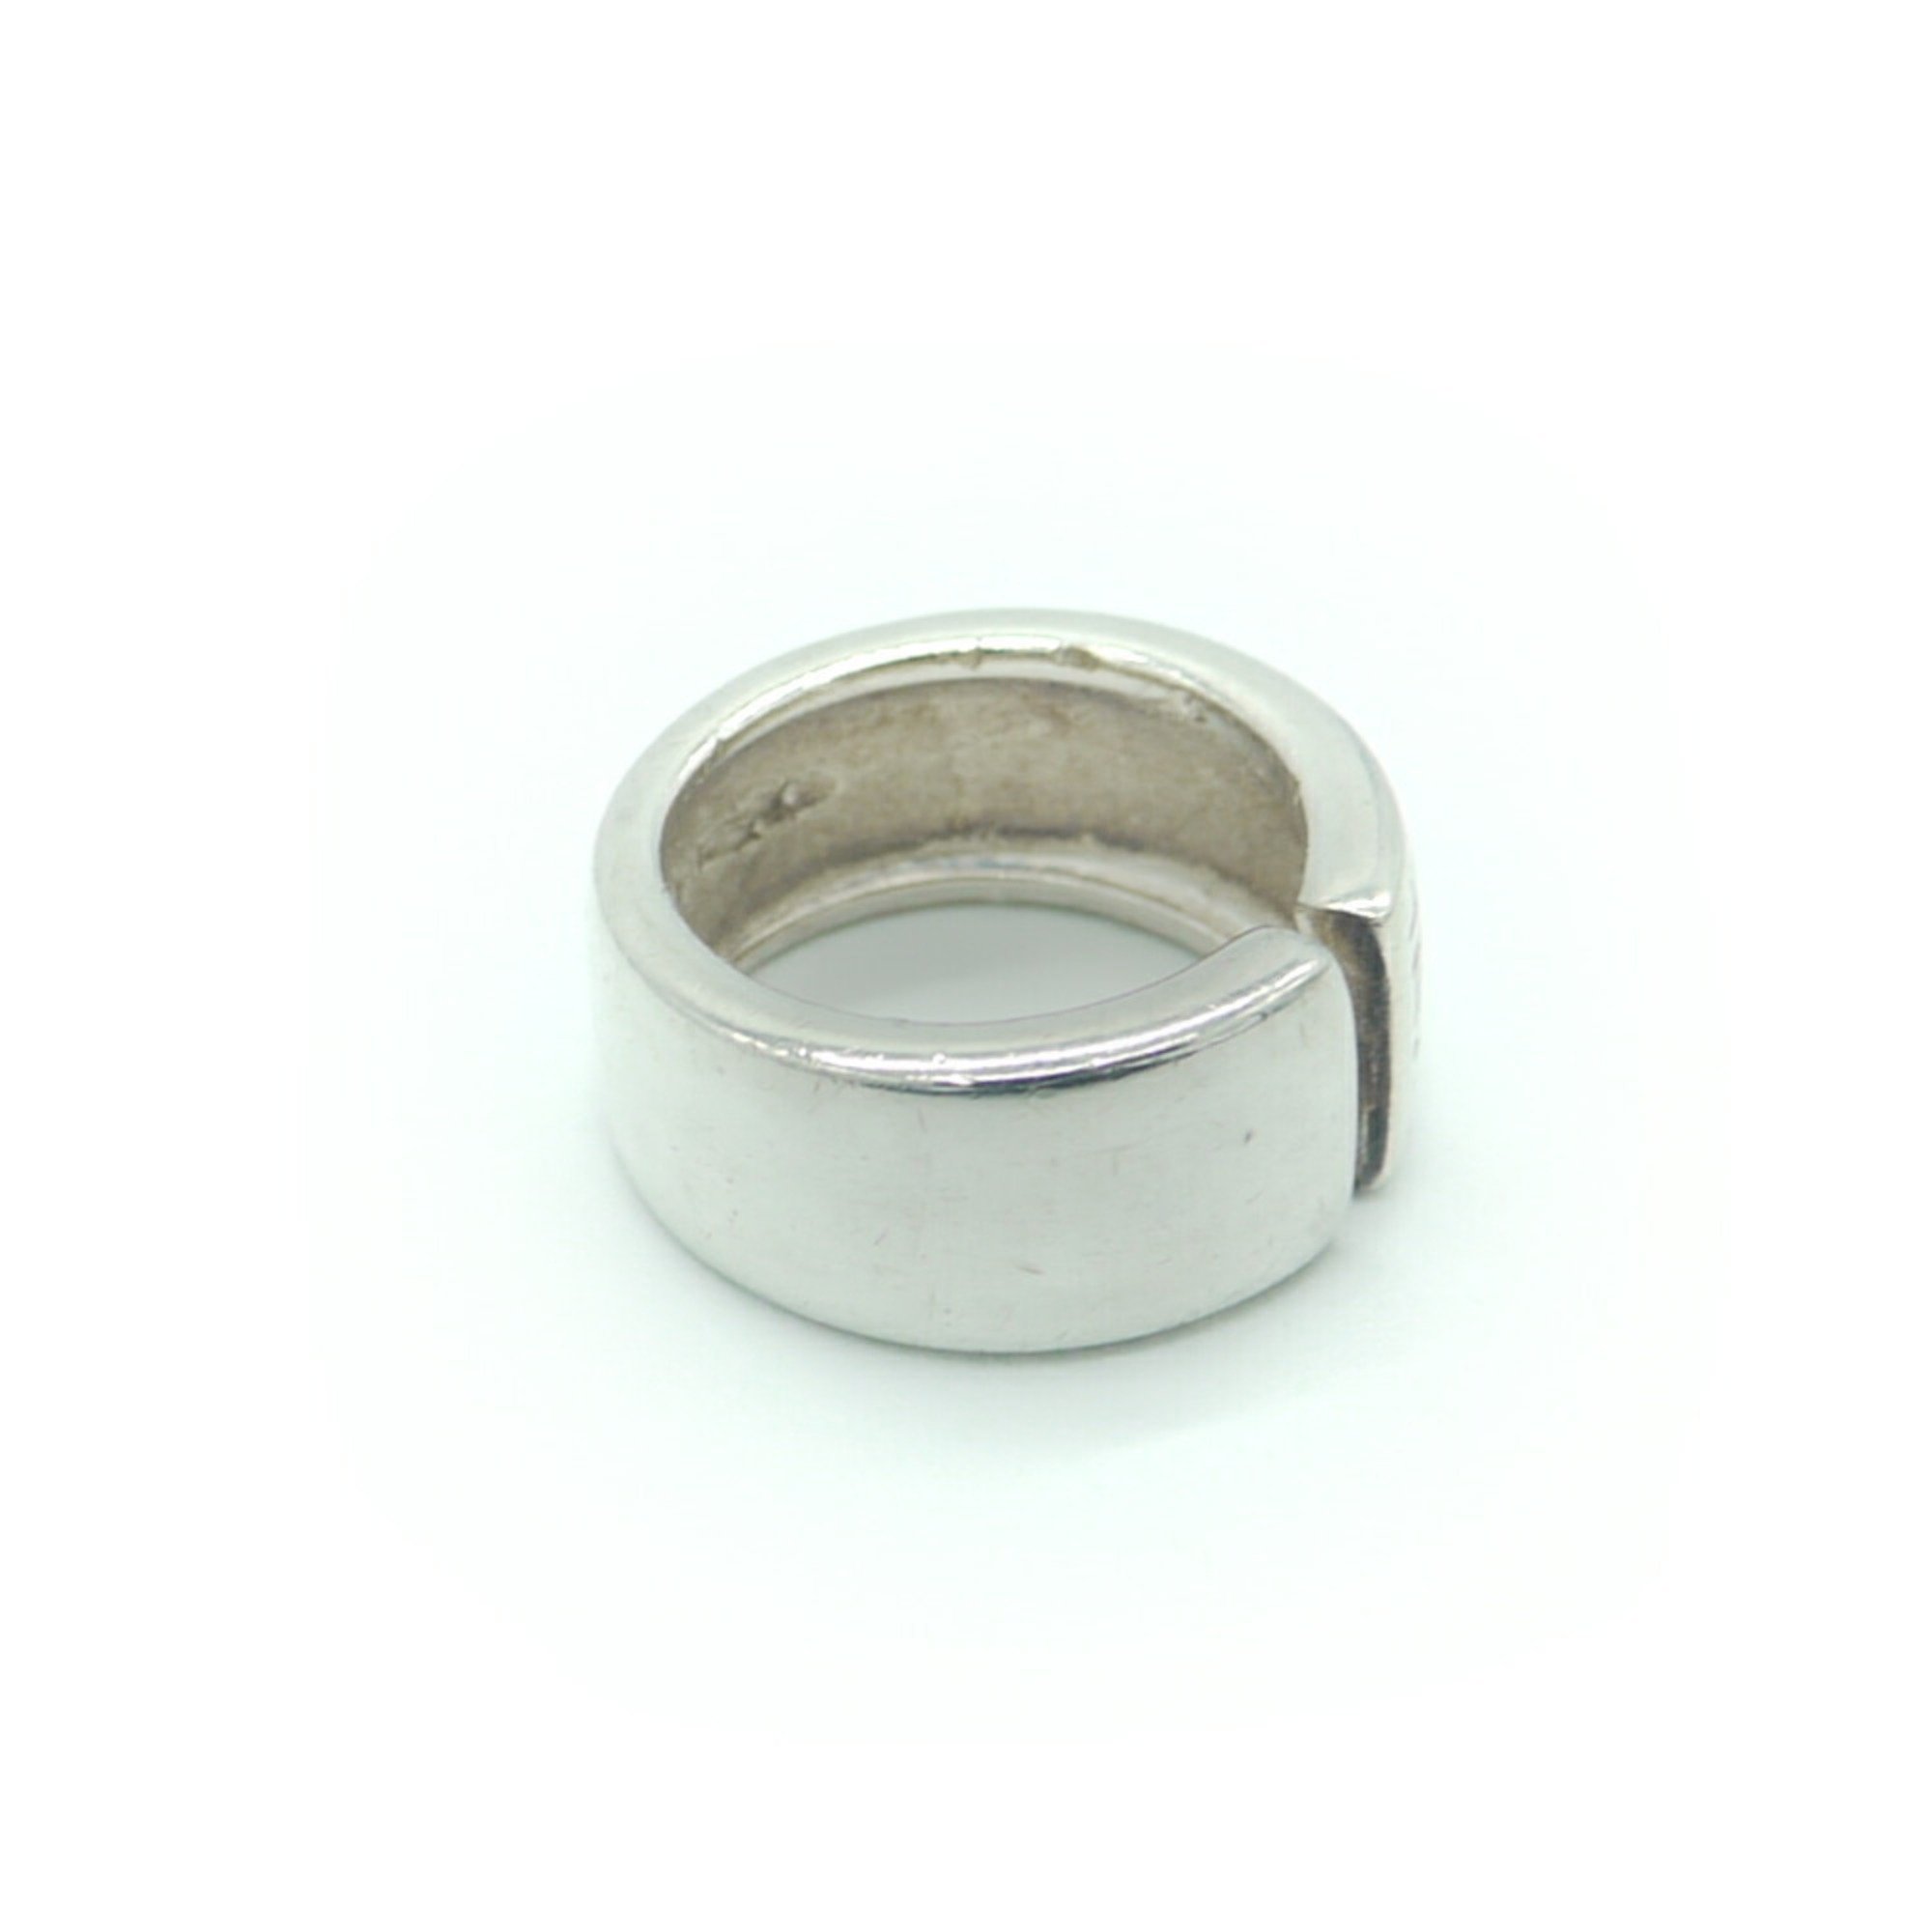 CHANEL Silver 925 Ring No. 10